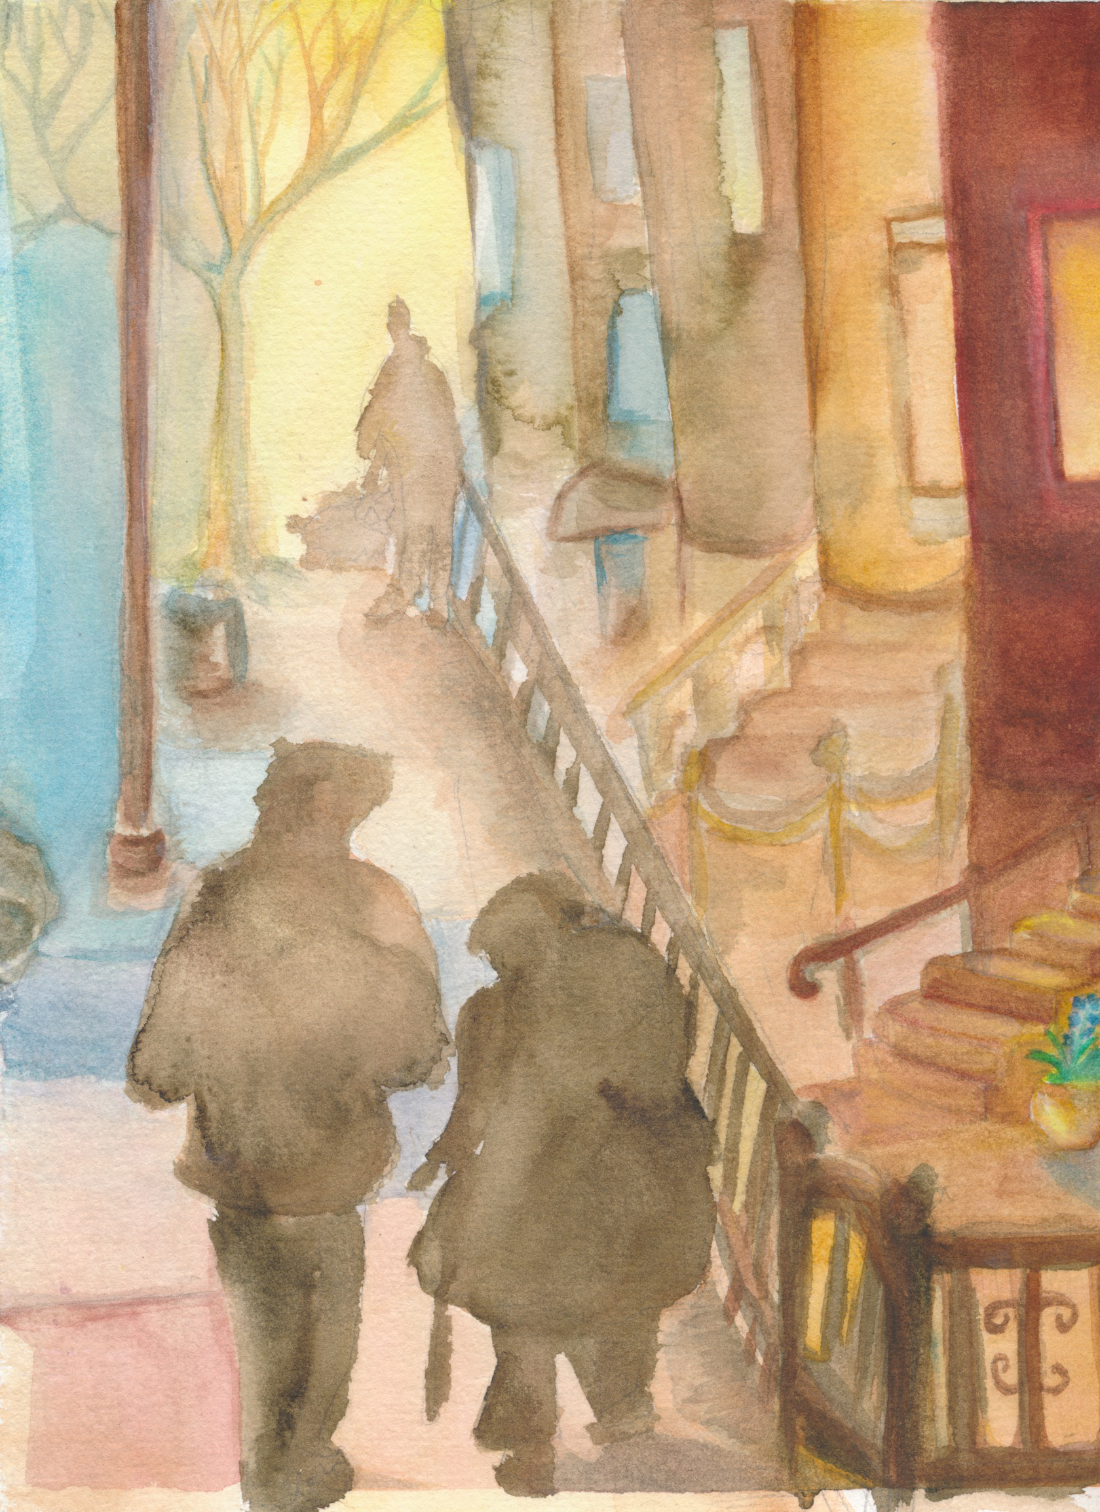 watercolor of two figures on a sidewalk with trees and front stoops of houses